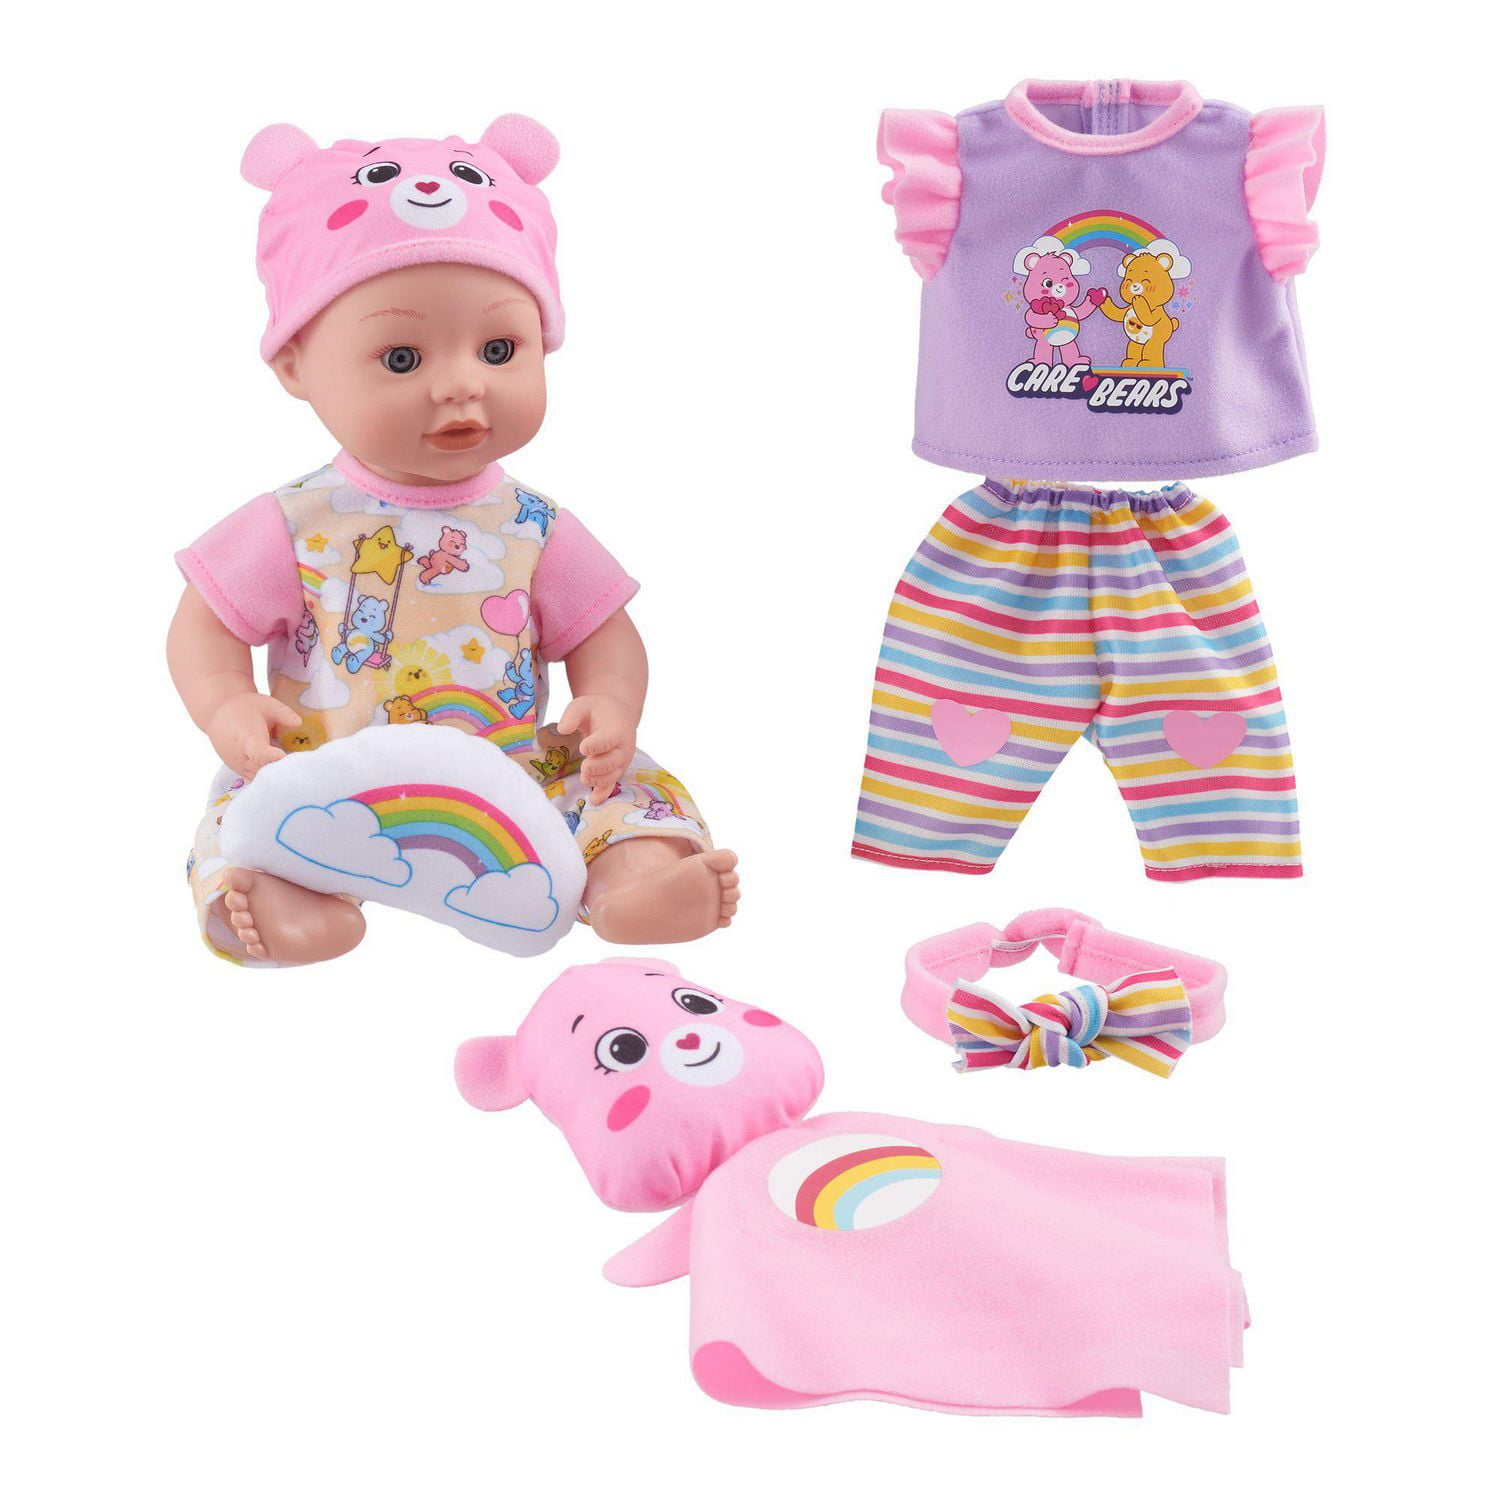 Ultra-premium Multicolor Soft Toys Dolls, For baby girls toy, 5-15